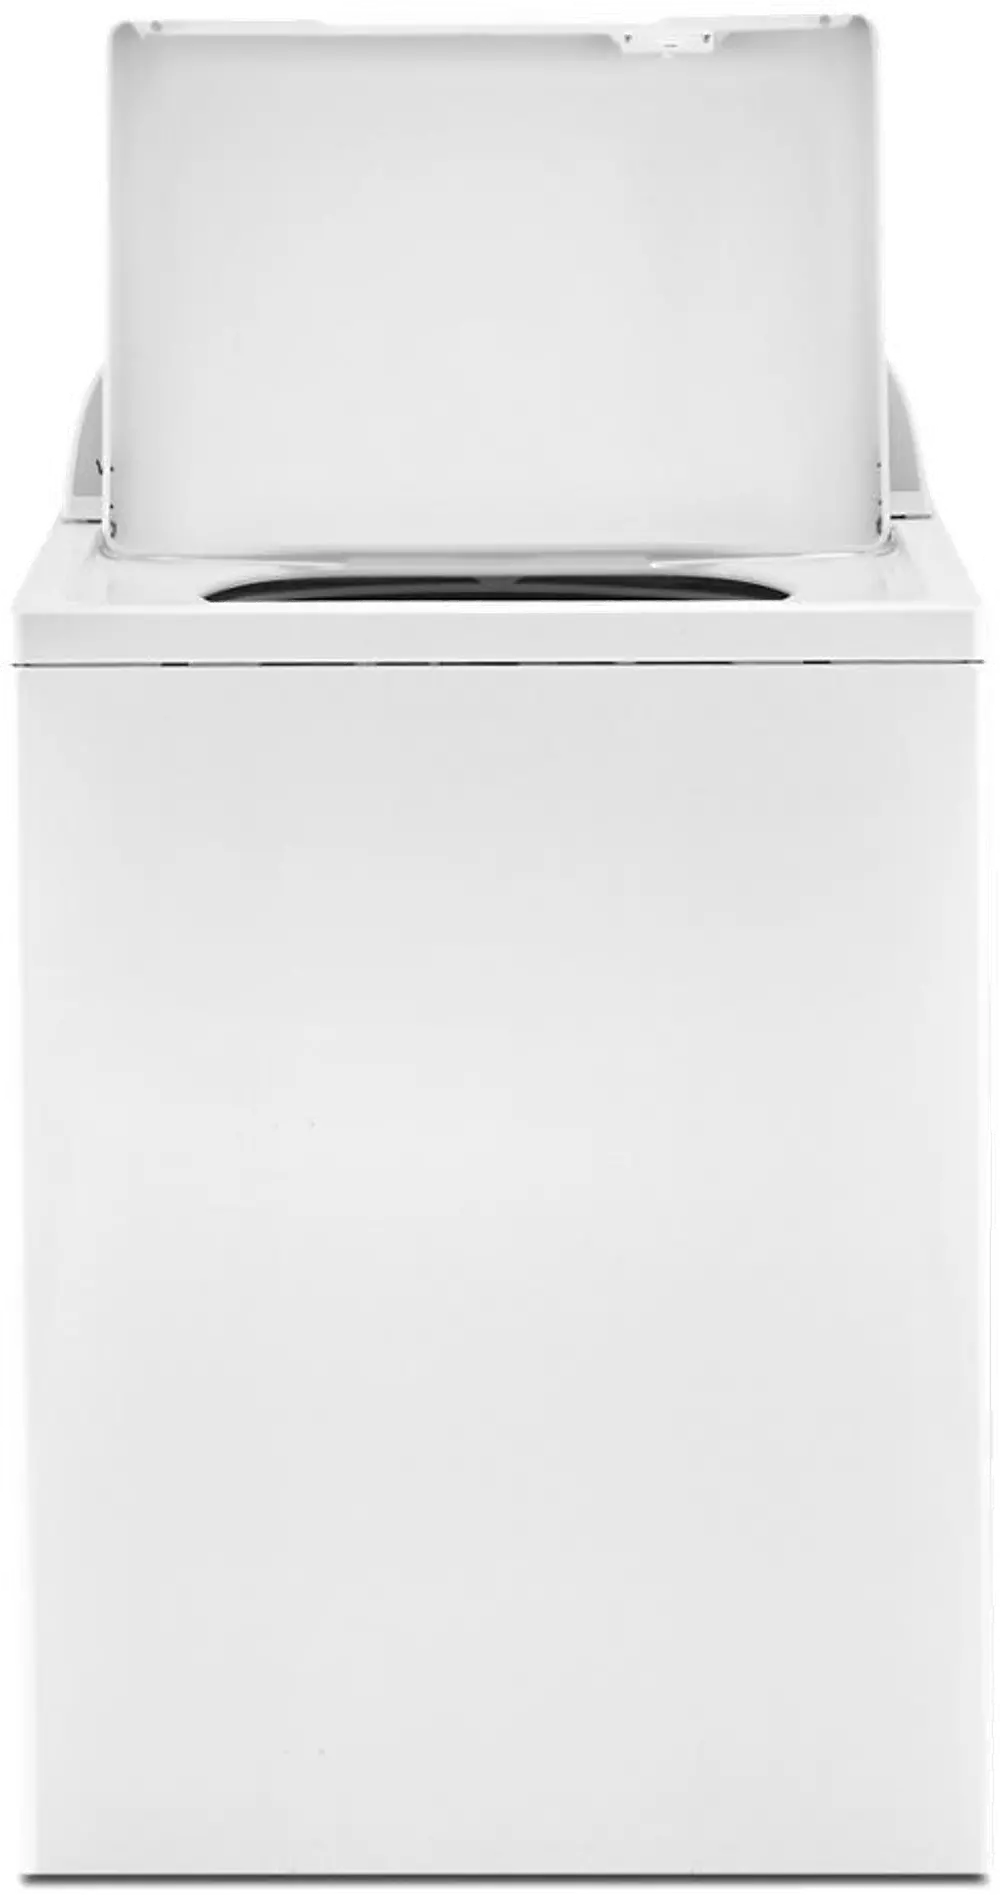 WTW5005KW Whirlpool 4.2 cu. ft. White Top Load Washer with Agitator - White-1